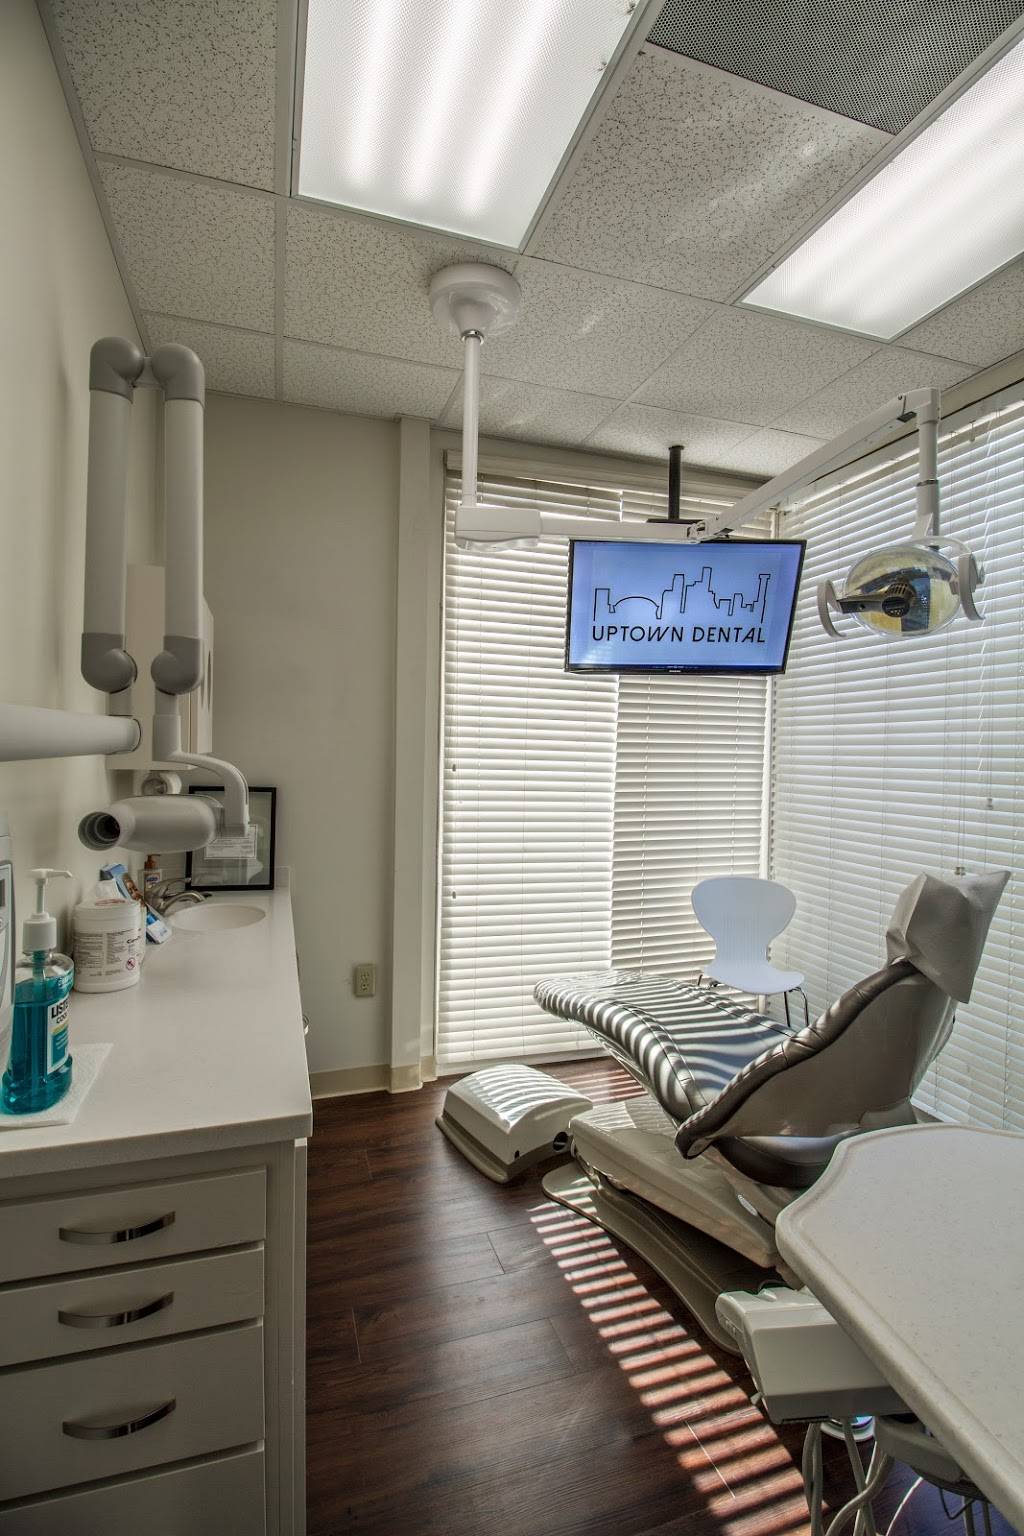 Uptown Dental | 8131 St Charles Ave, New Orleans, LA 70118, USA | Phone: (504) 304-6800